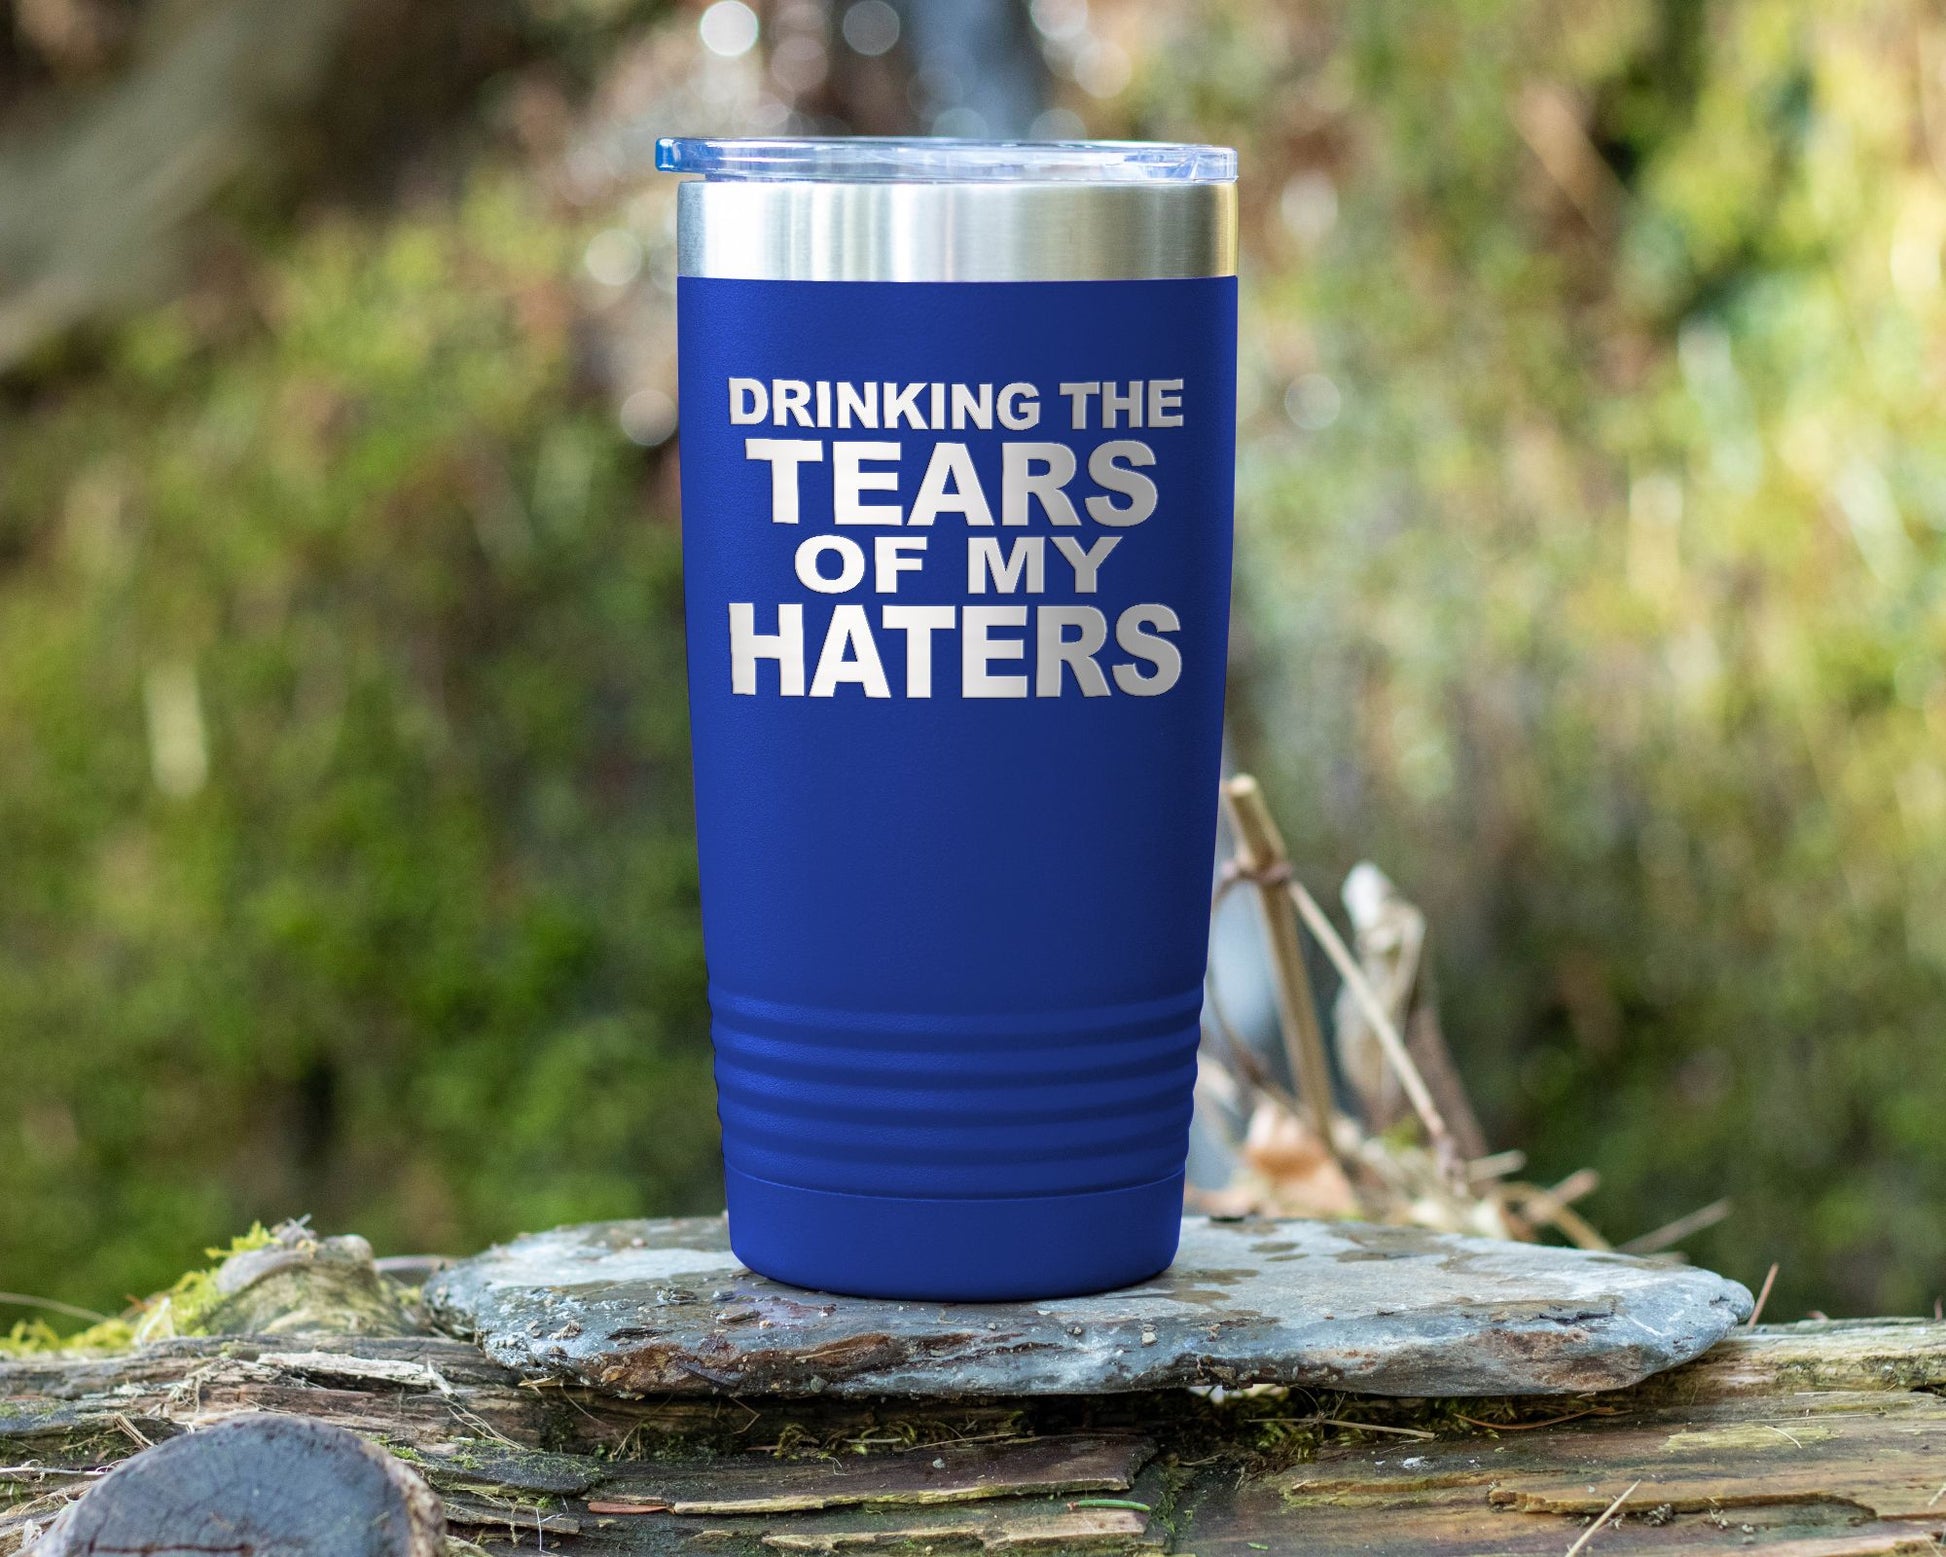 Insulated Tumbler, Insulated Tumbler with Lid, Stainless Steel Tumbler, Thermal Tumbler, Stainless Steel Cups, Drinking the tears - Mug Project